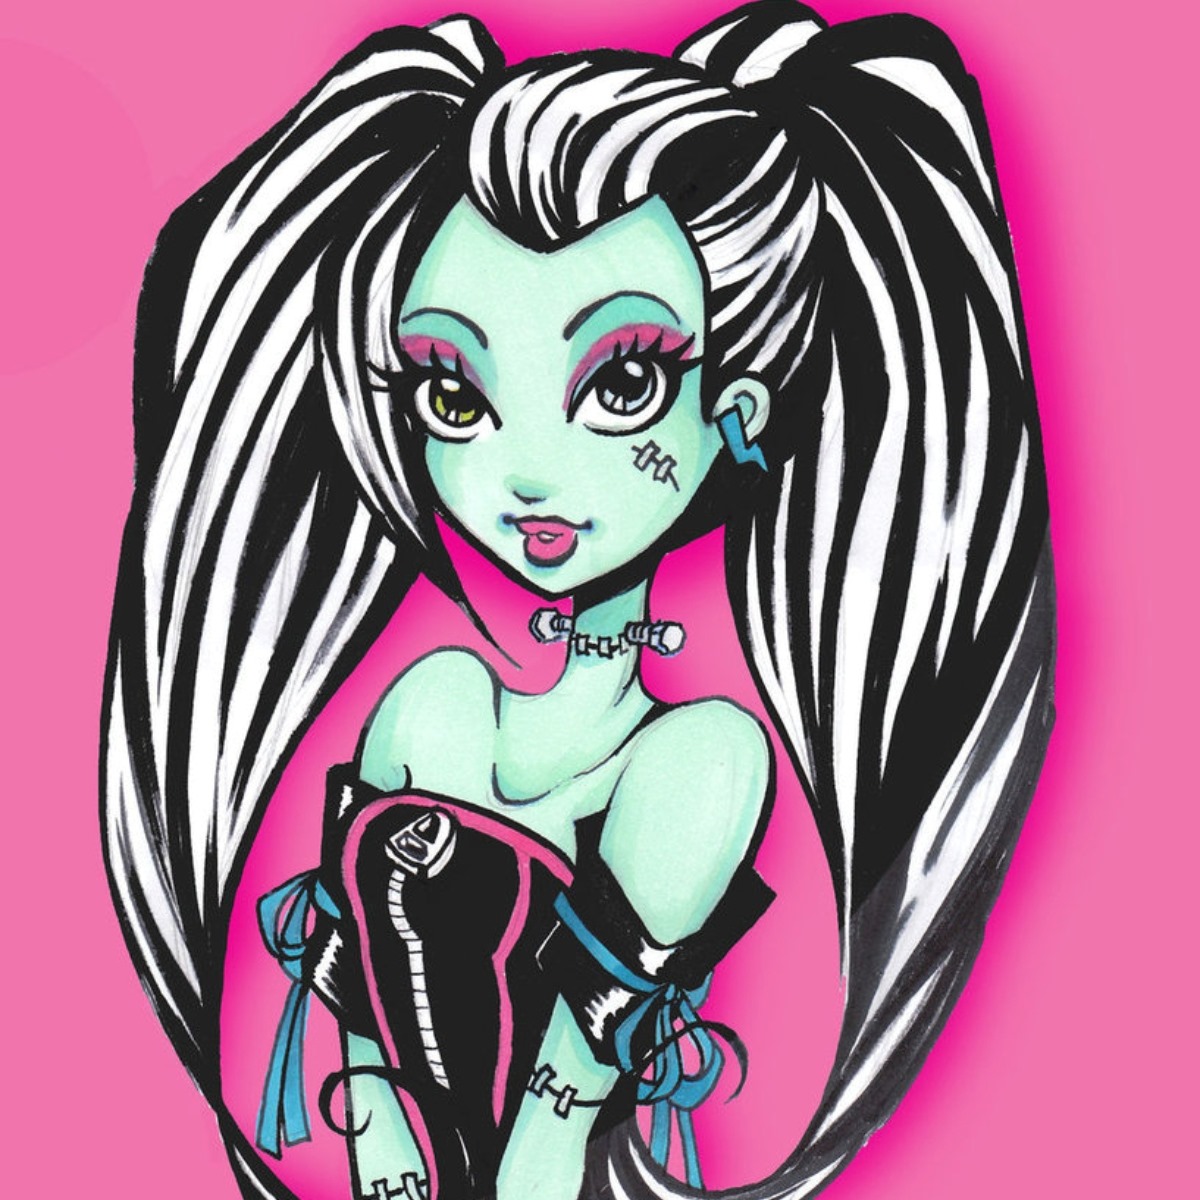 10 Facts About Frankie Stein (Monster High) 